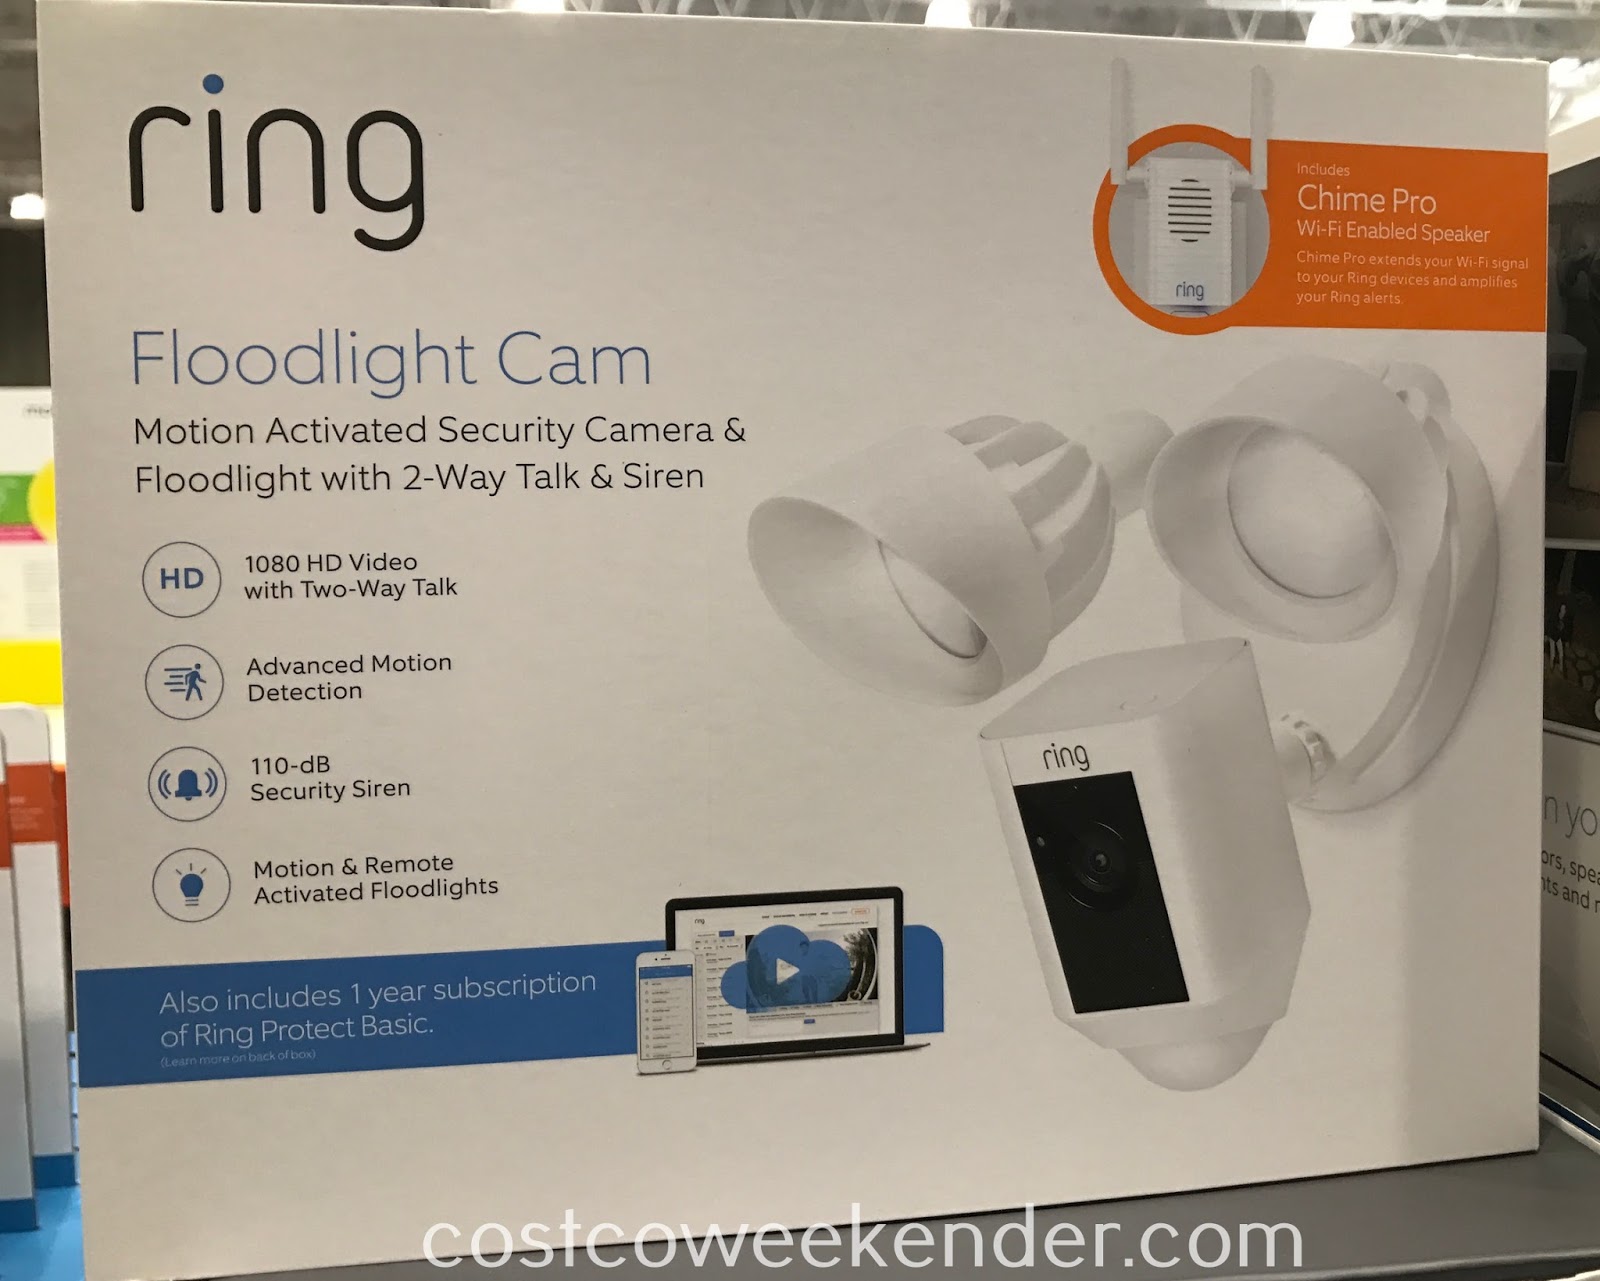 Ring Floodlight Camera and Chime Pro Costco Weekender